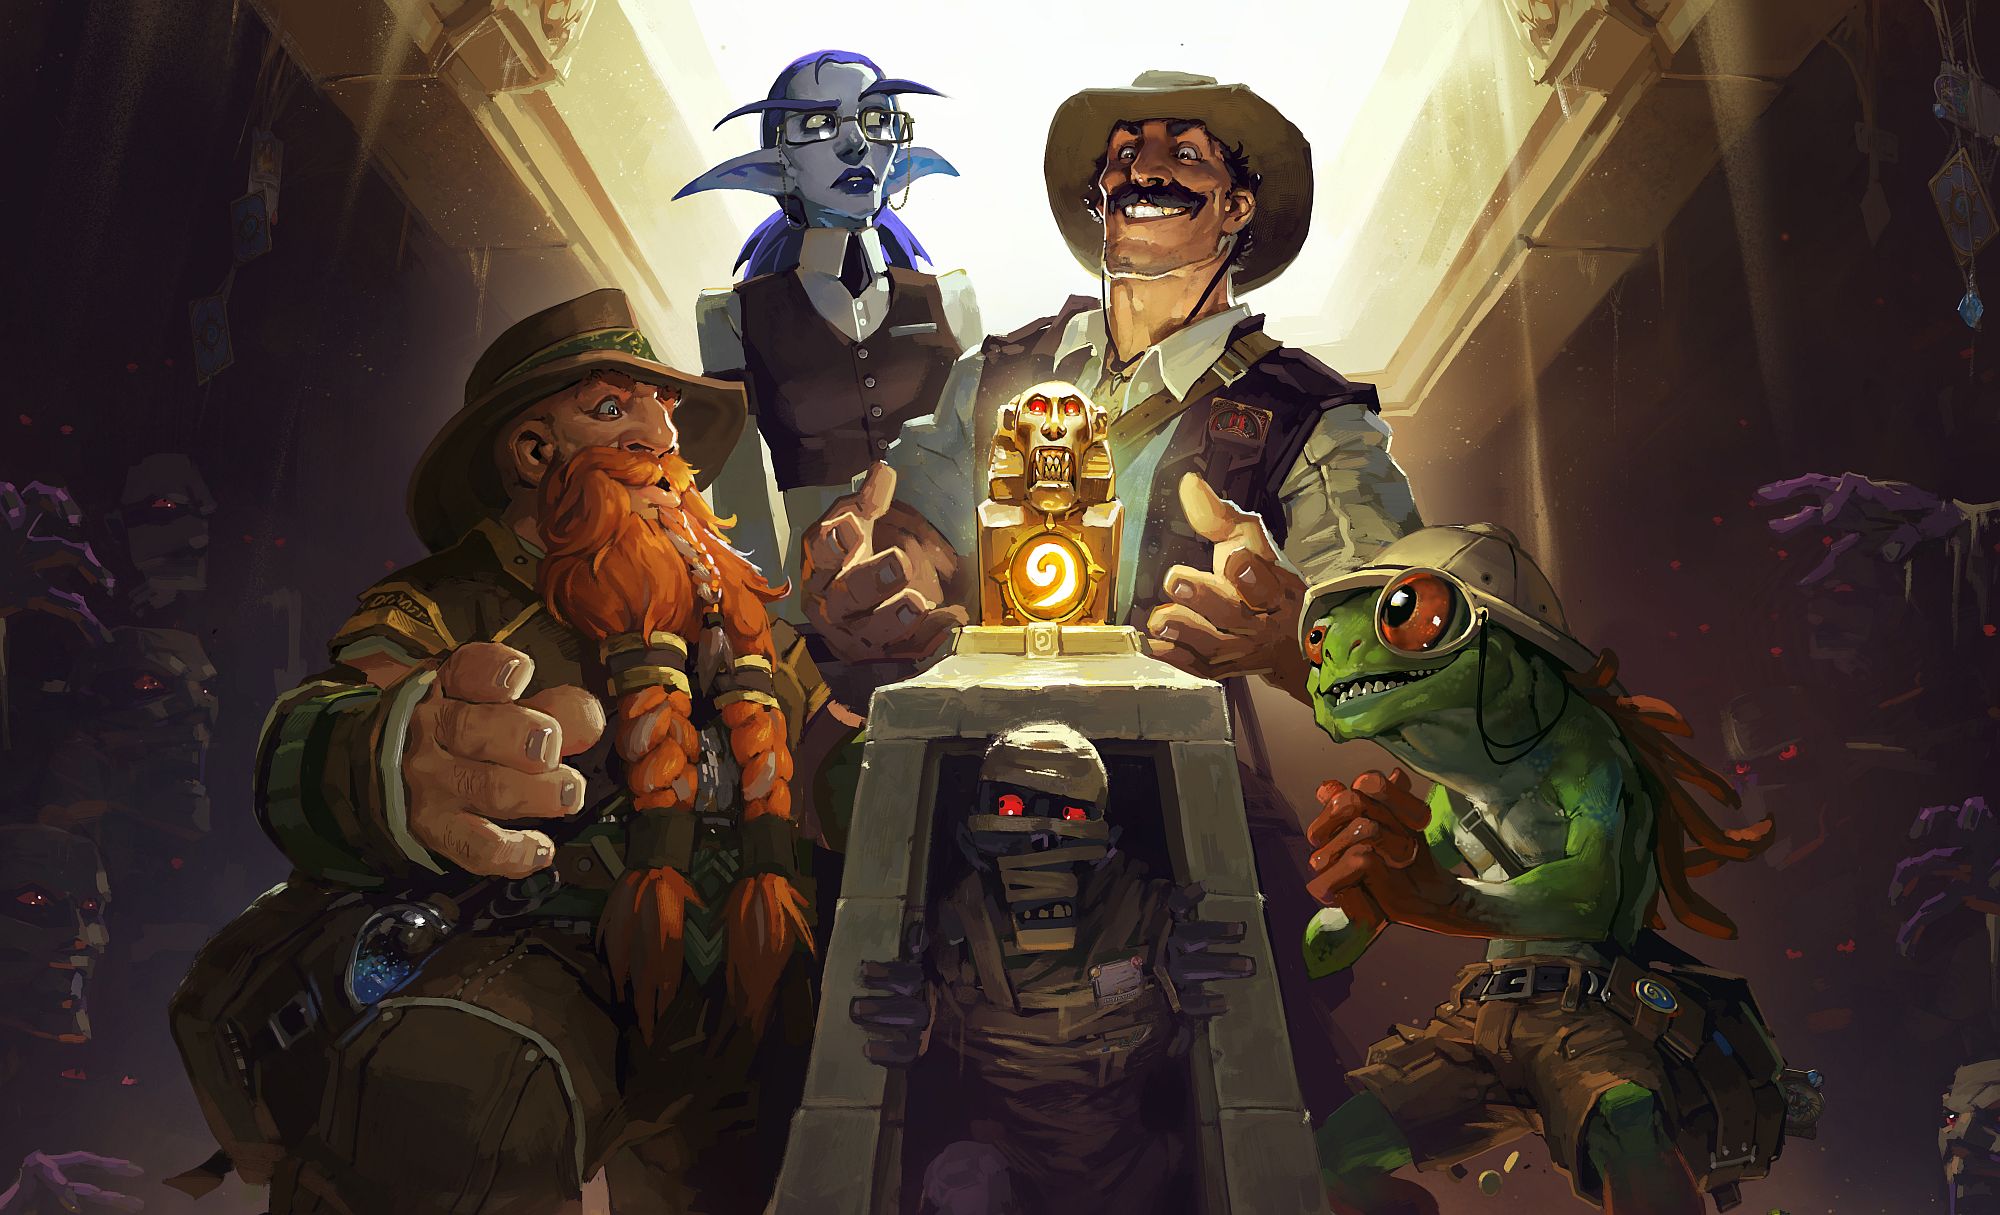 Image for Hearthstone: League of Explorers announced at BlizzCon 2015